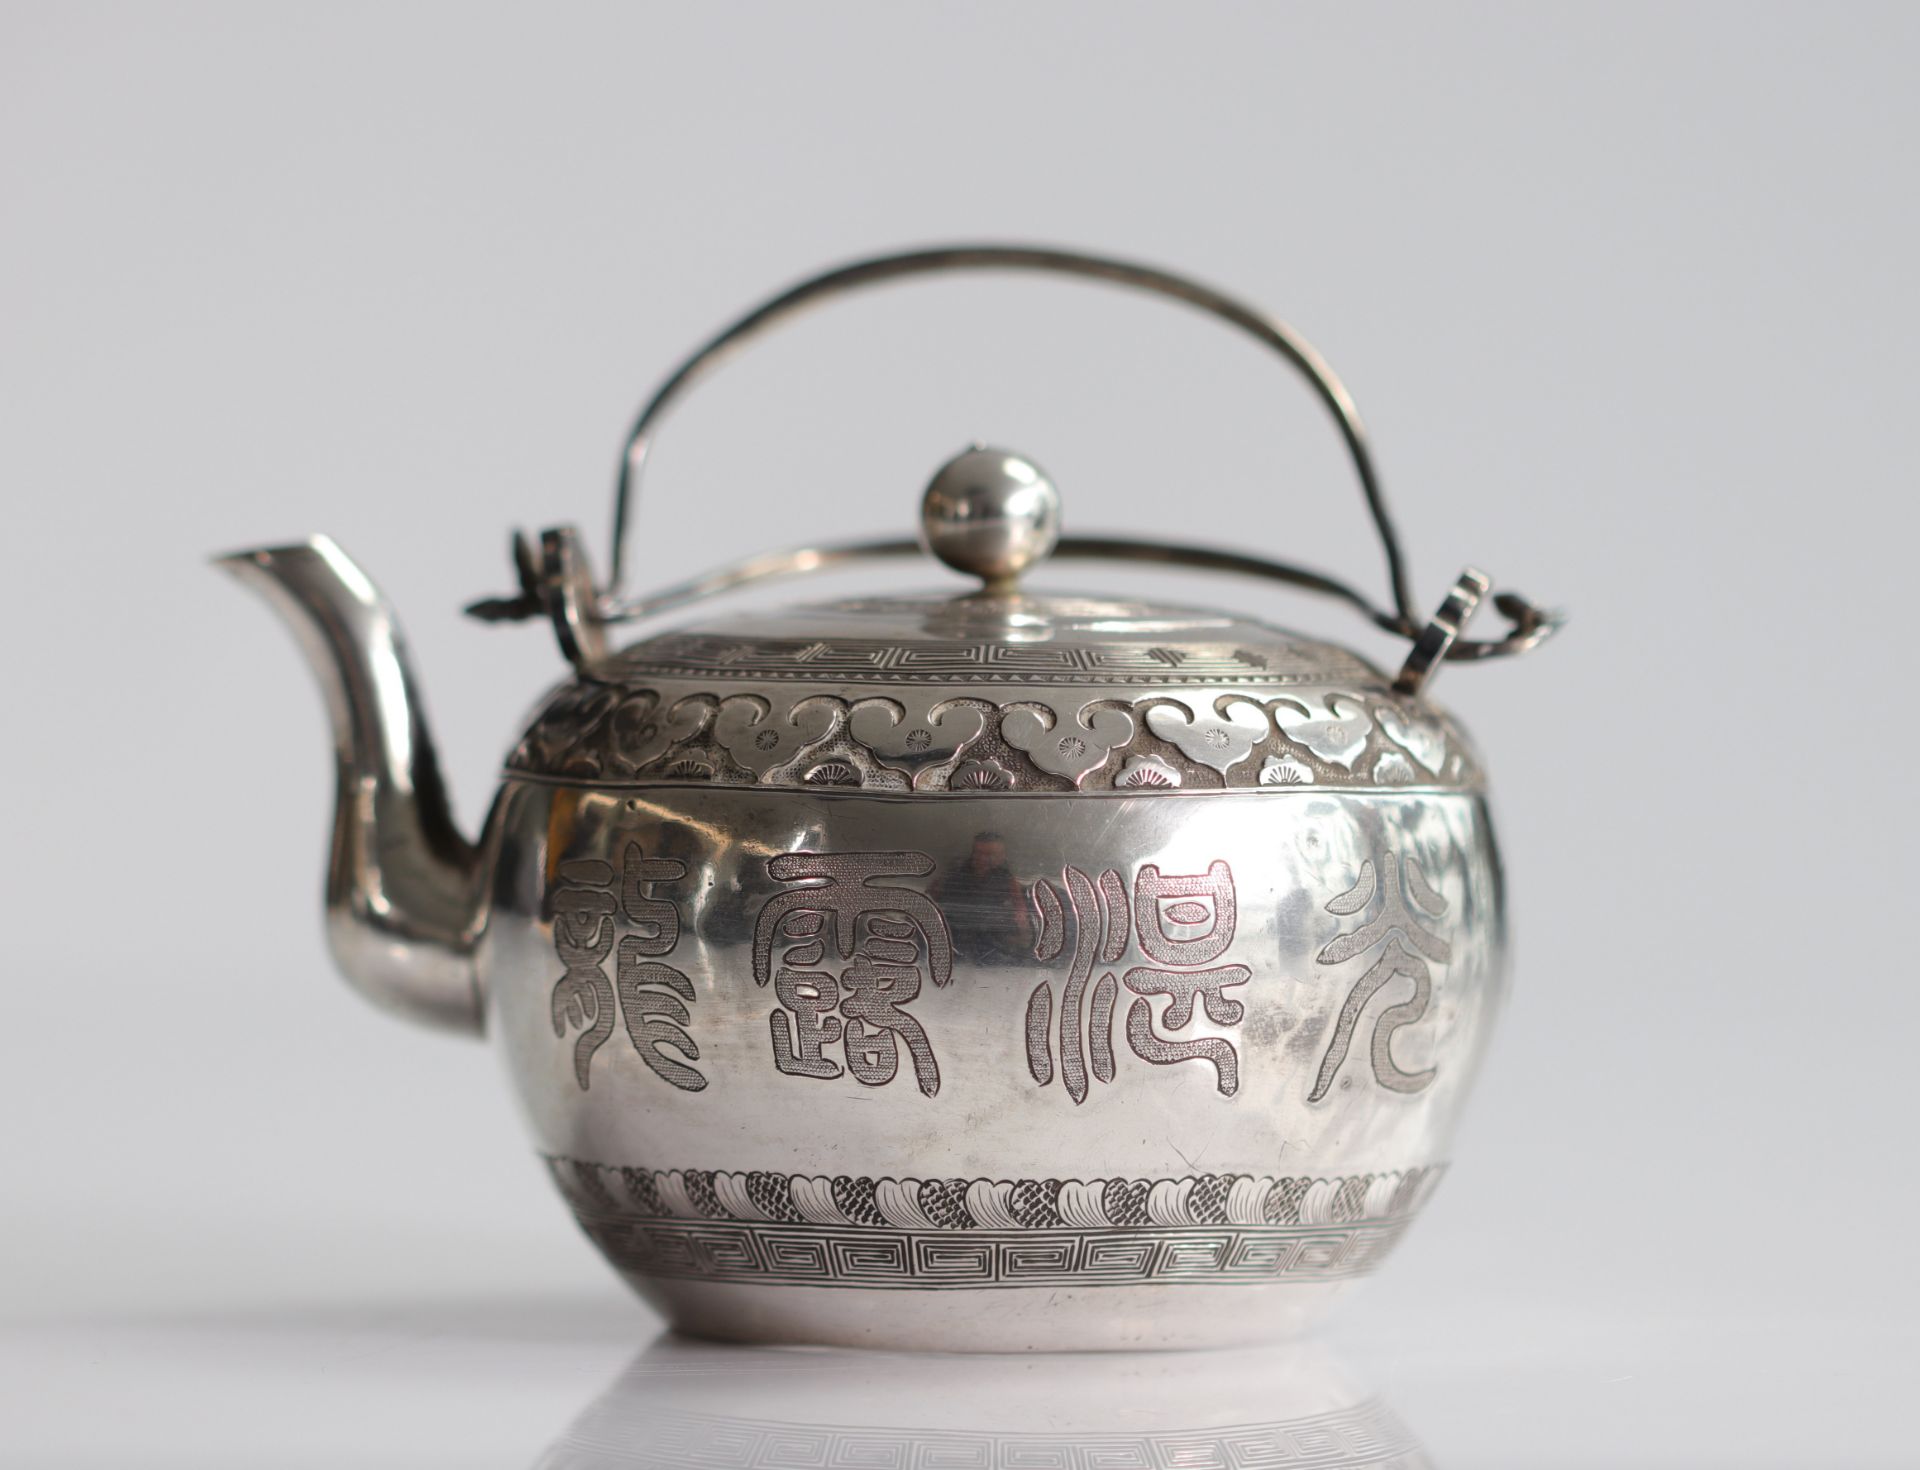 China silver teapot and cup - Image 3 of 11